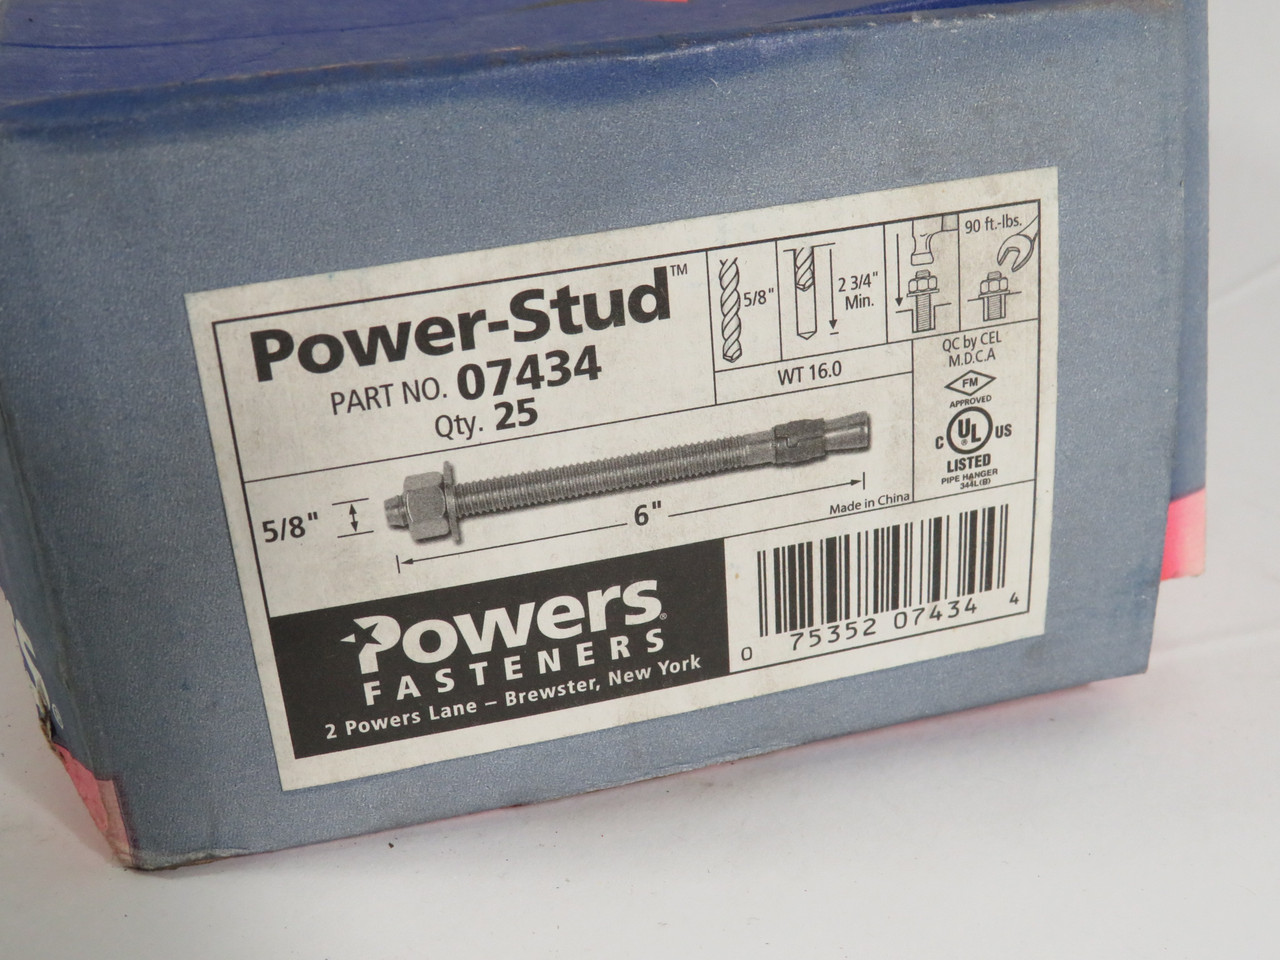 Powers Fasteners 07434 Power Stud 5/8" x 6 25-Pack NEW